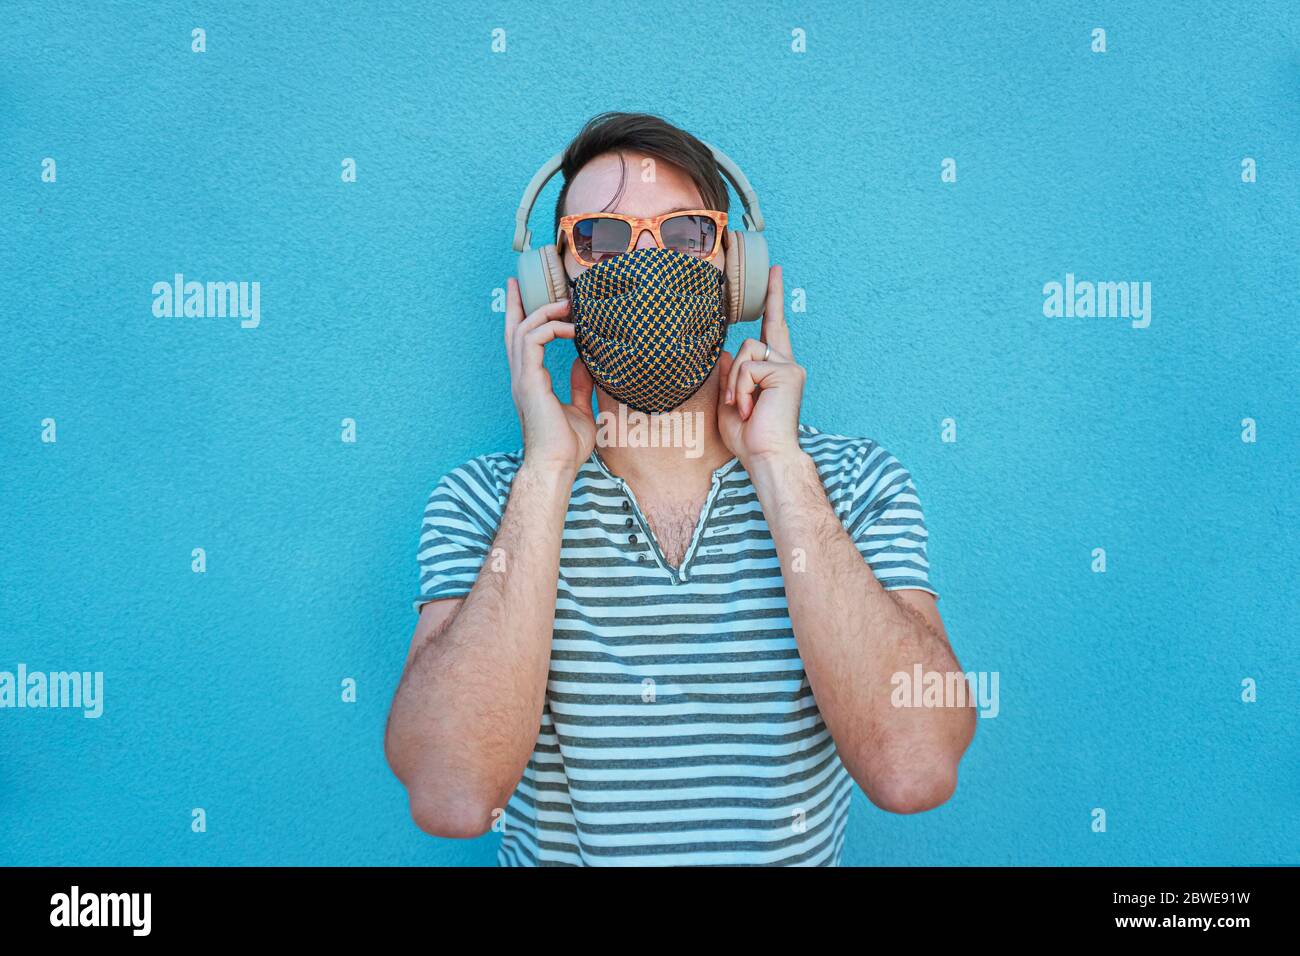 Boy with headphones on listening to music in covid-19 time with face mask and keeping the social distance Stock Photo